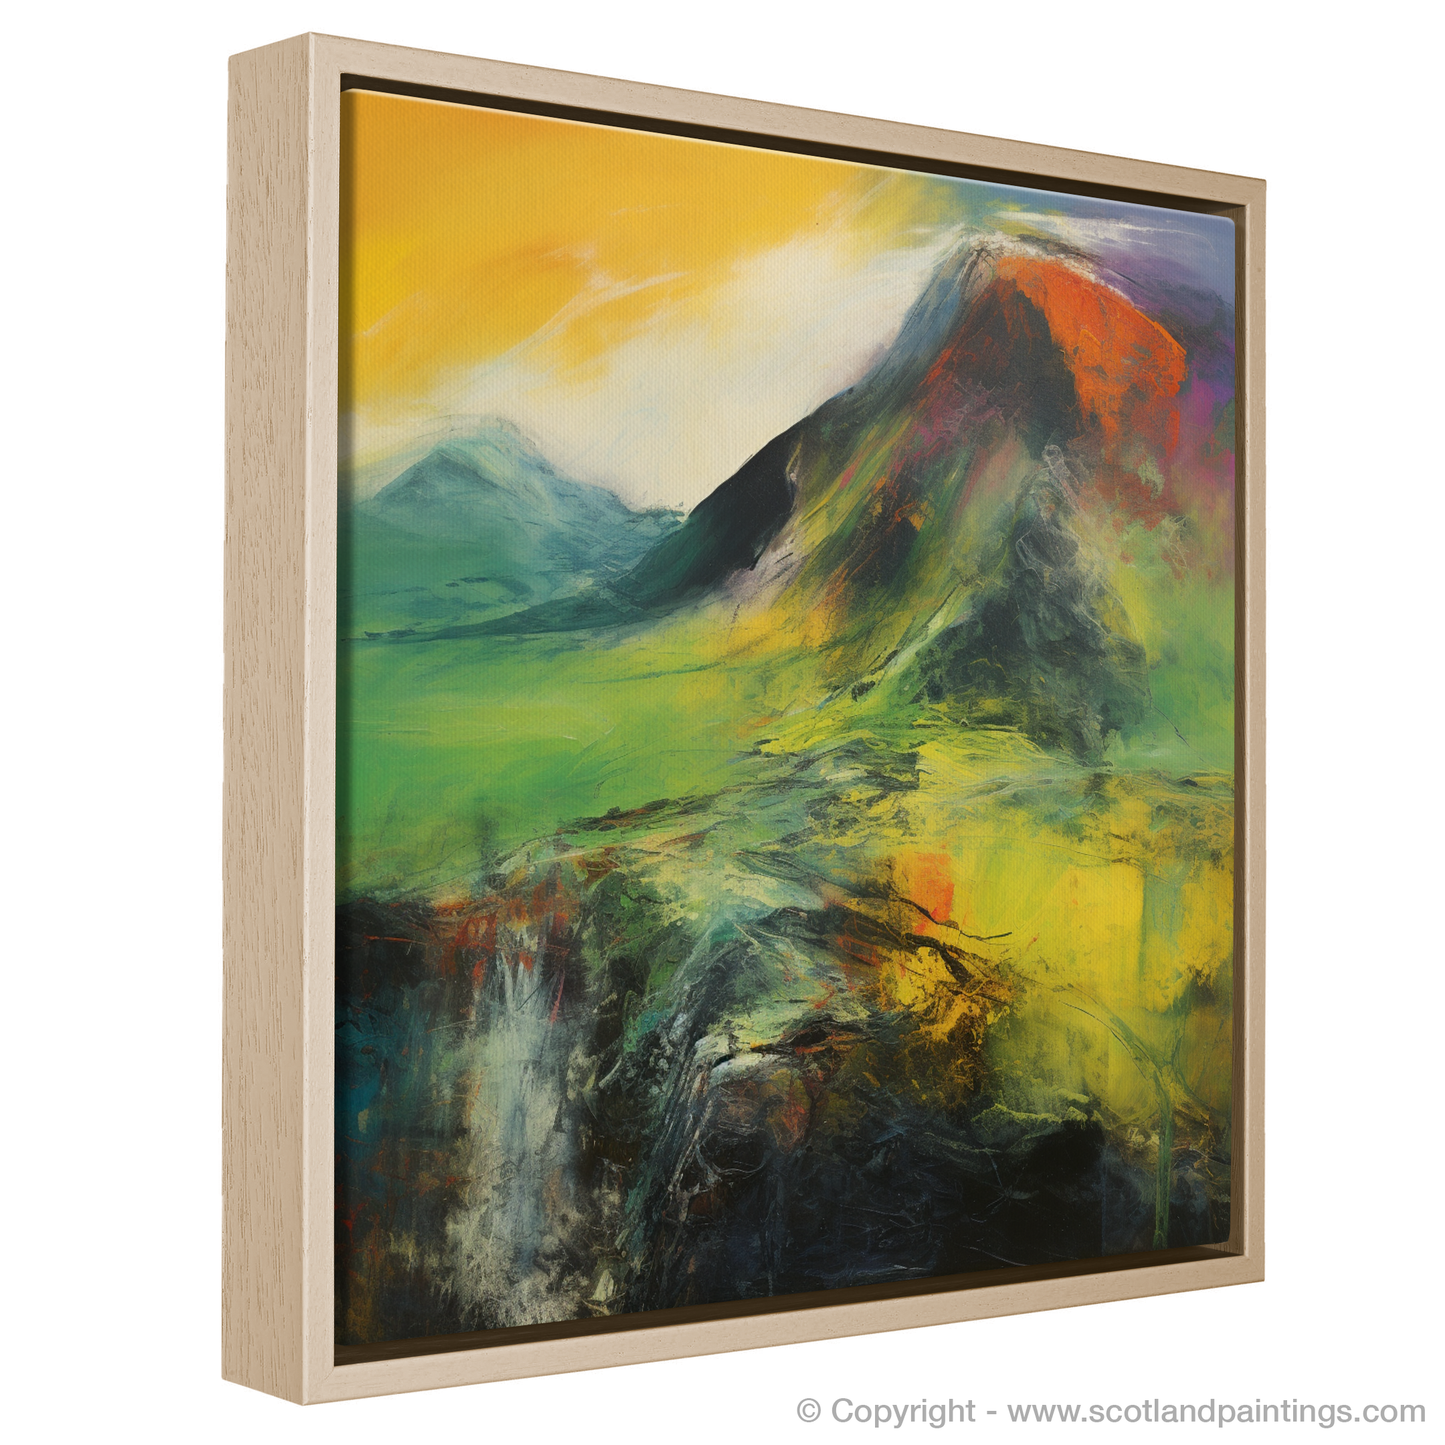 Painting and Art Print of Meall a' Choire Lèith entitled "Highland Fervor: An Abstract Ode to Meall a' Choire Lèith".